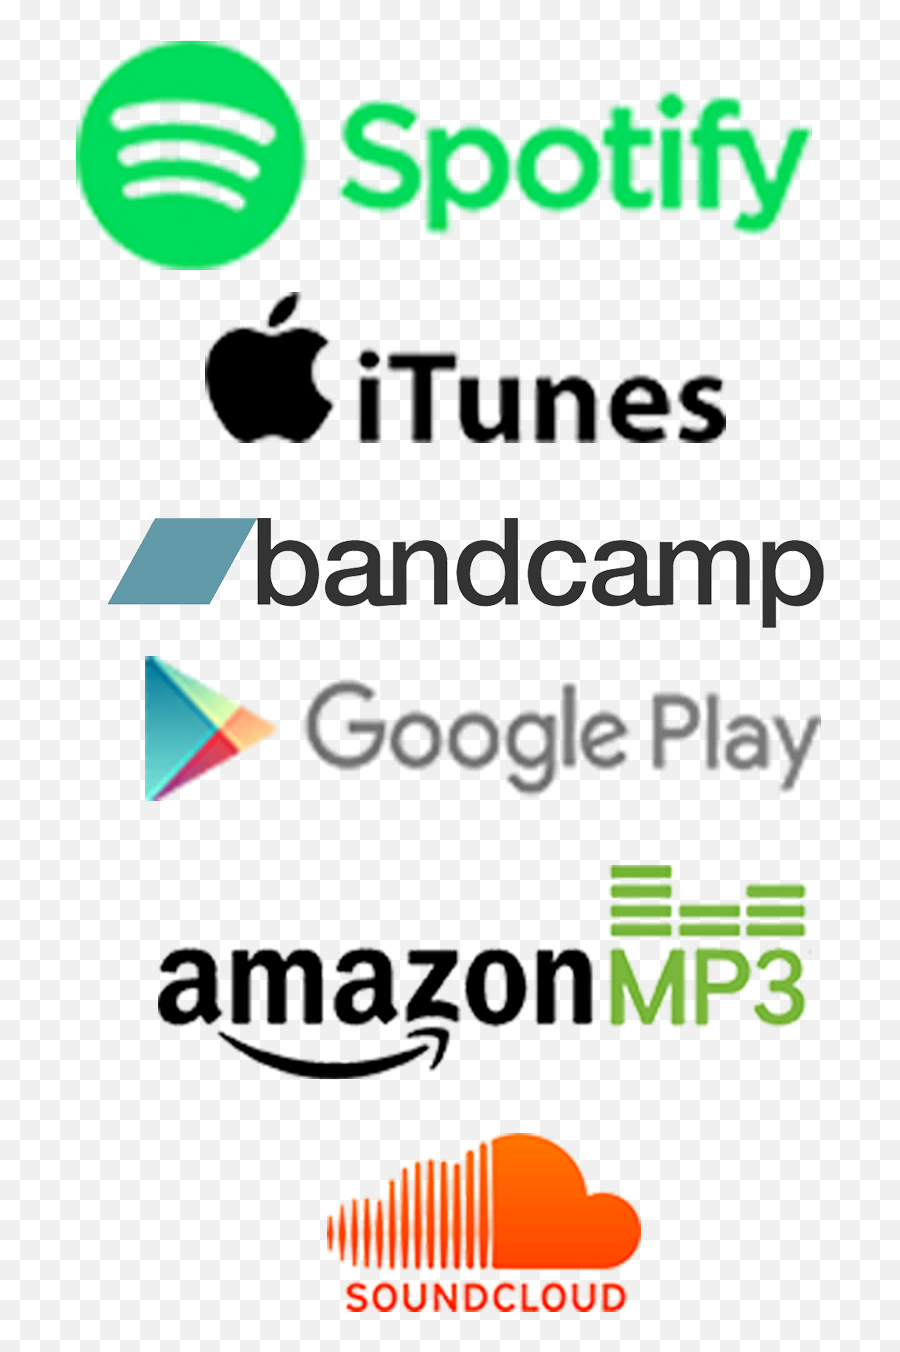 Bandcamp Logo Png - We Work With Some Of The Best Up And Out Soon On Spotify Itunes Emoji,Spotify Logo Png